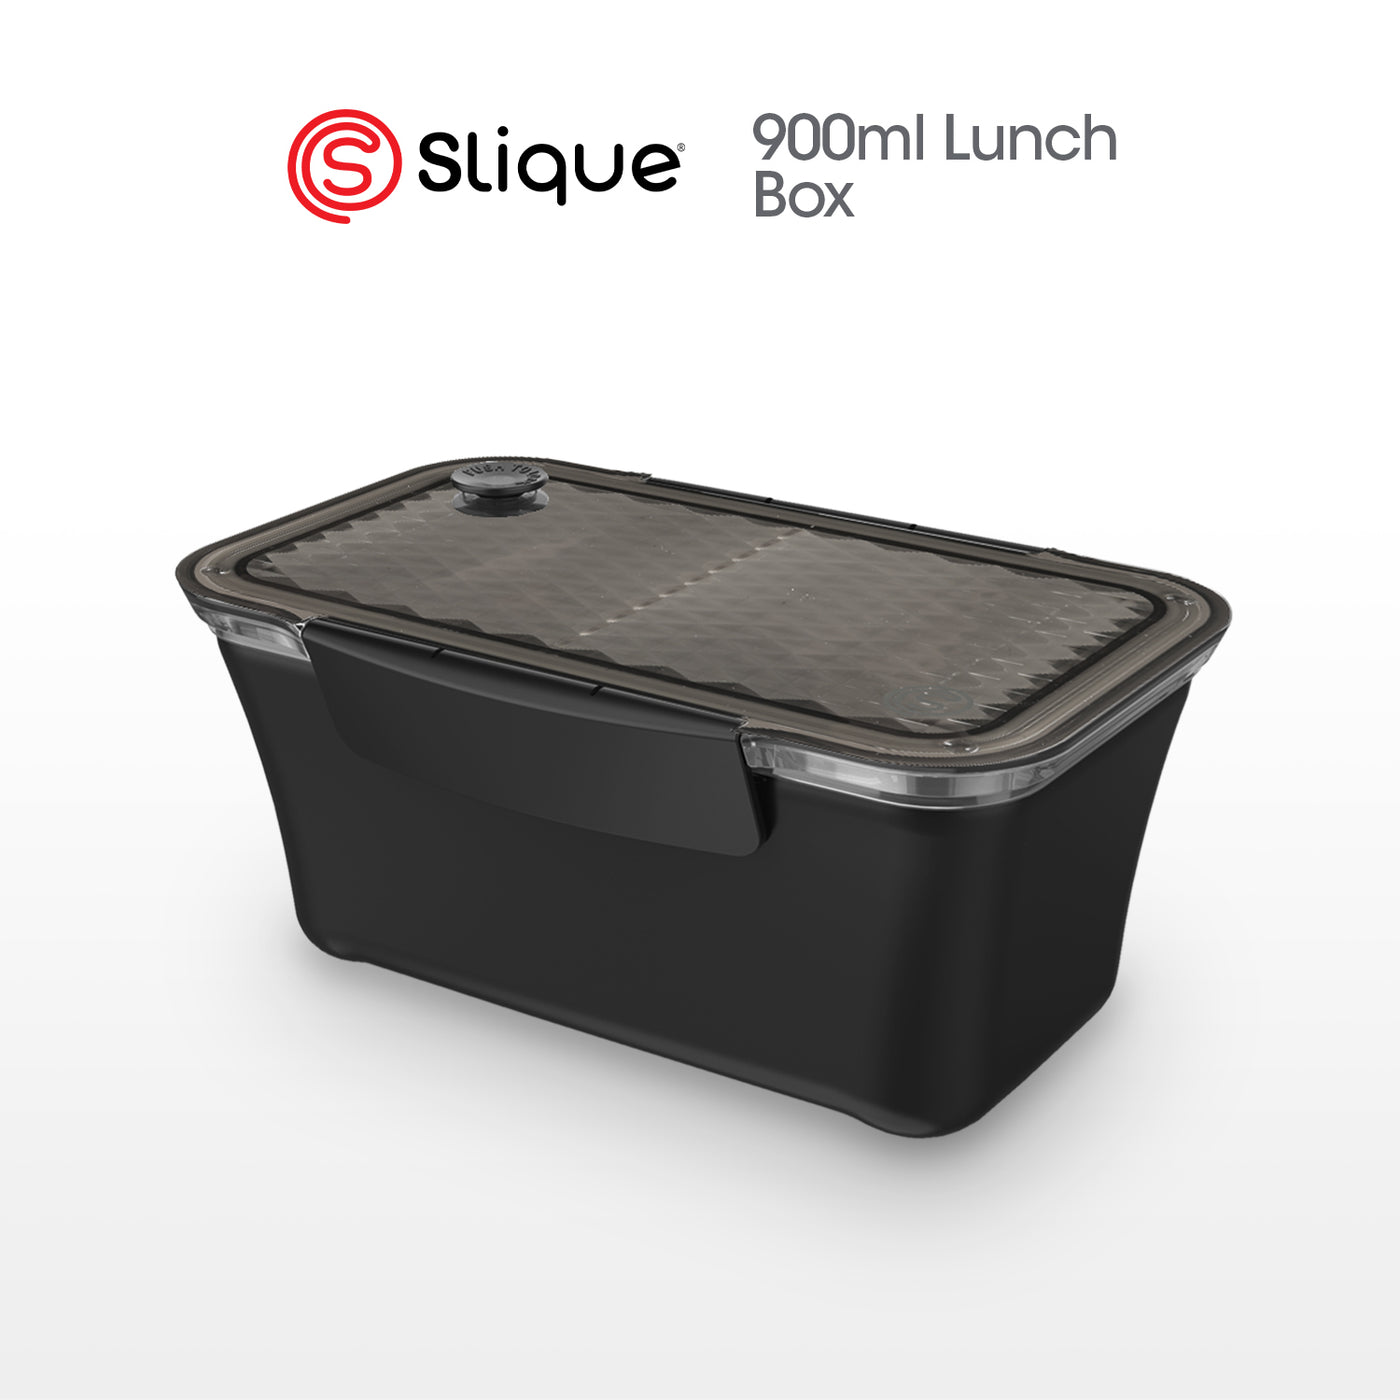 SLIQUE Premium Stainless Steel Insulated Lunch Box w/ Compartment 900ml0.9L BPA Free (BLACK)